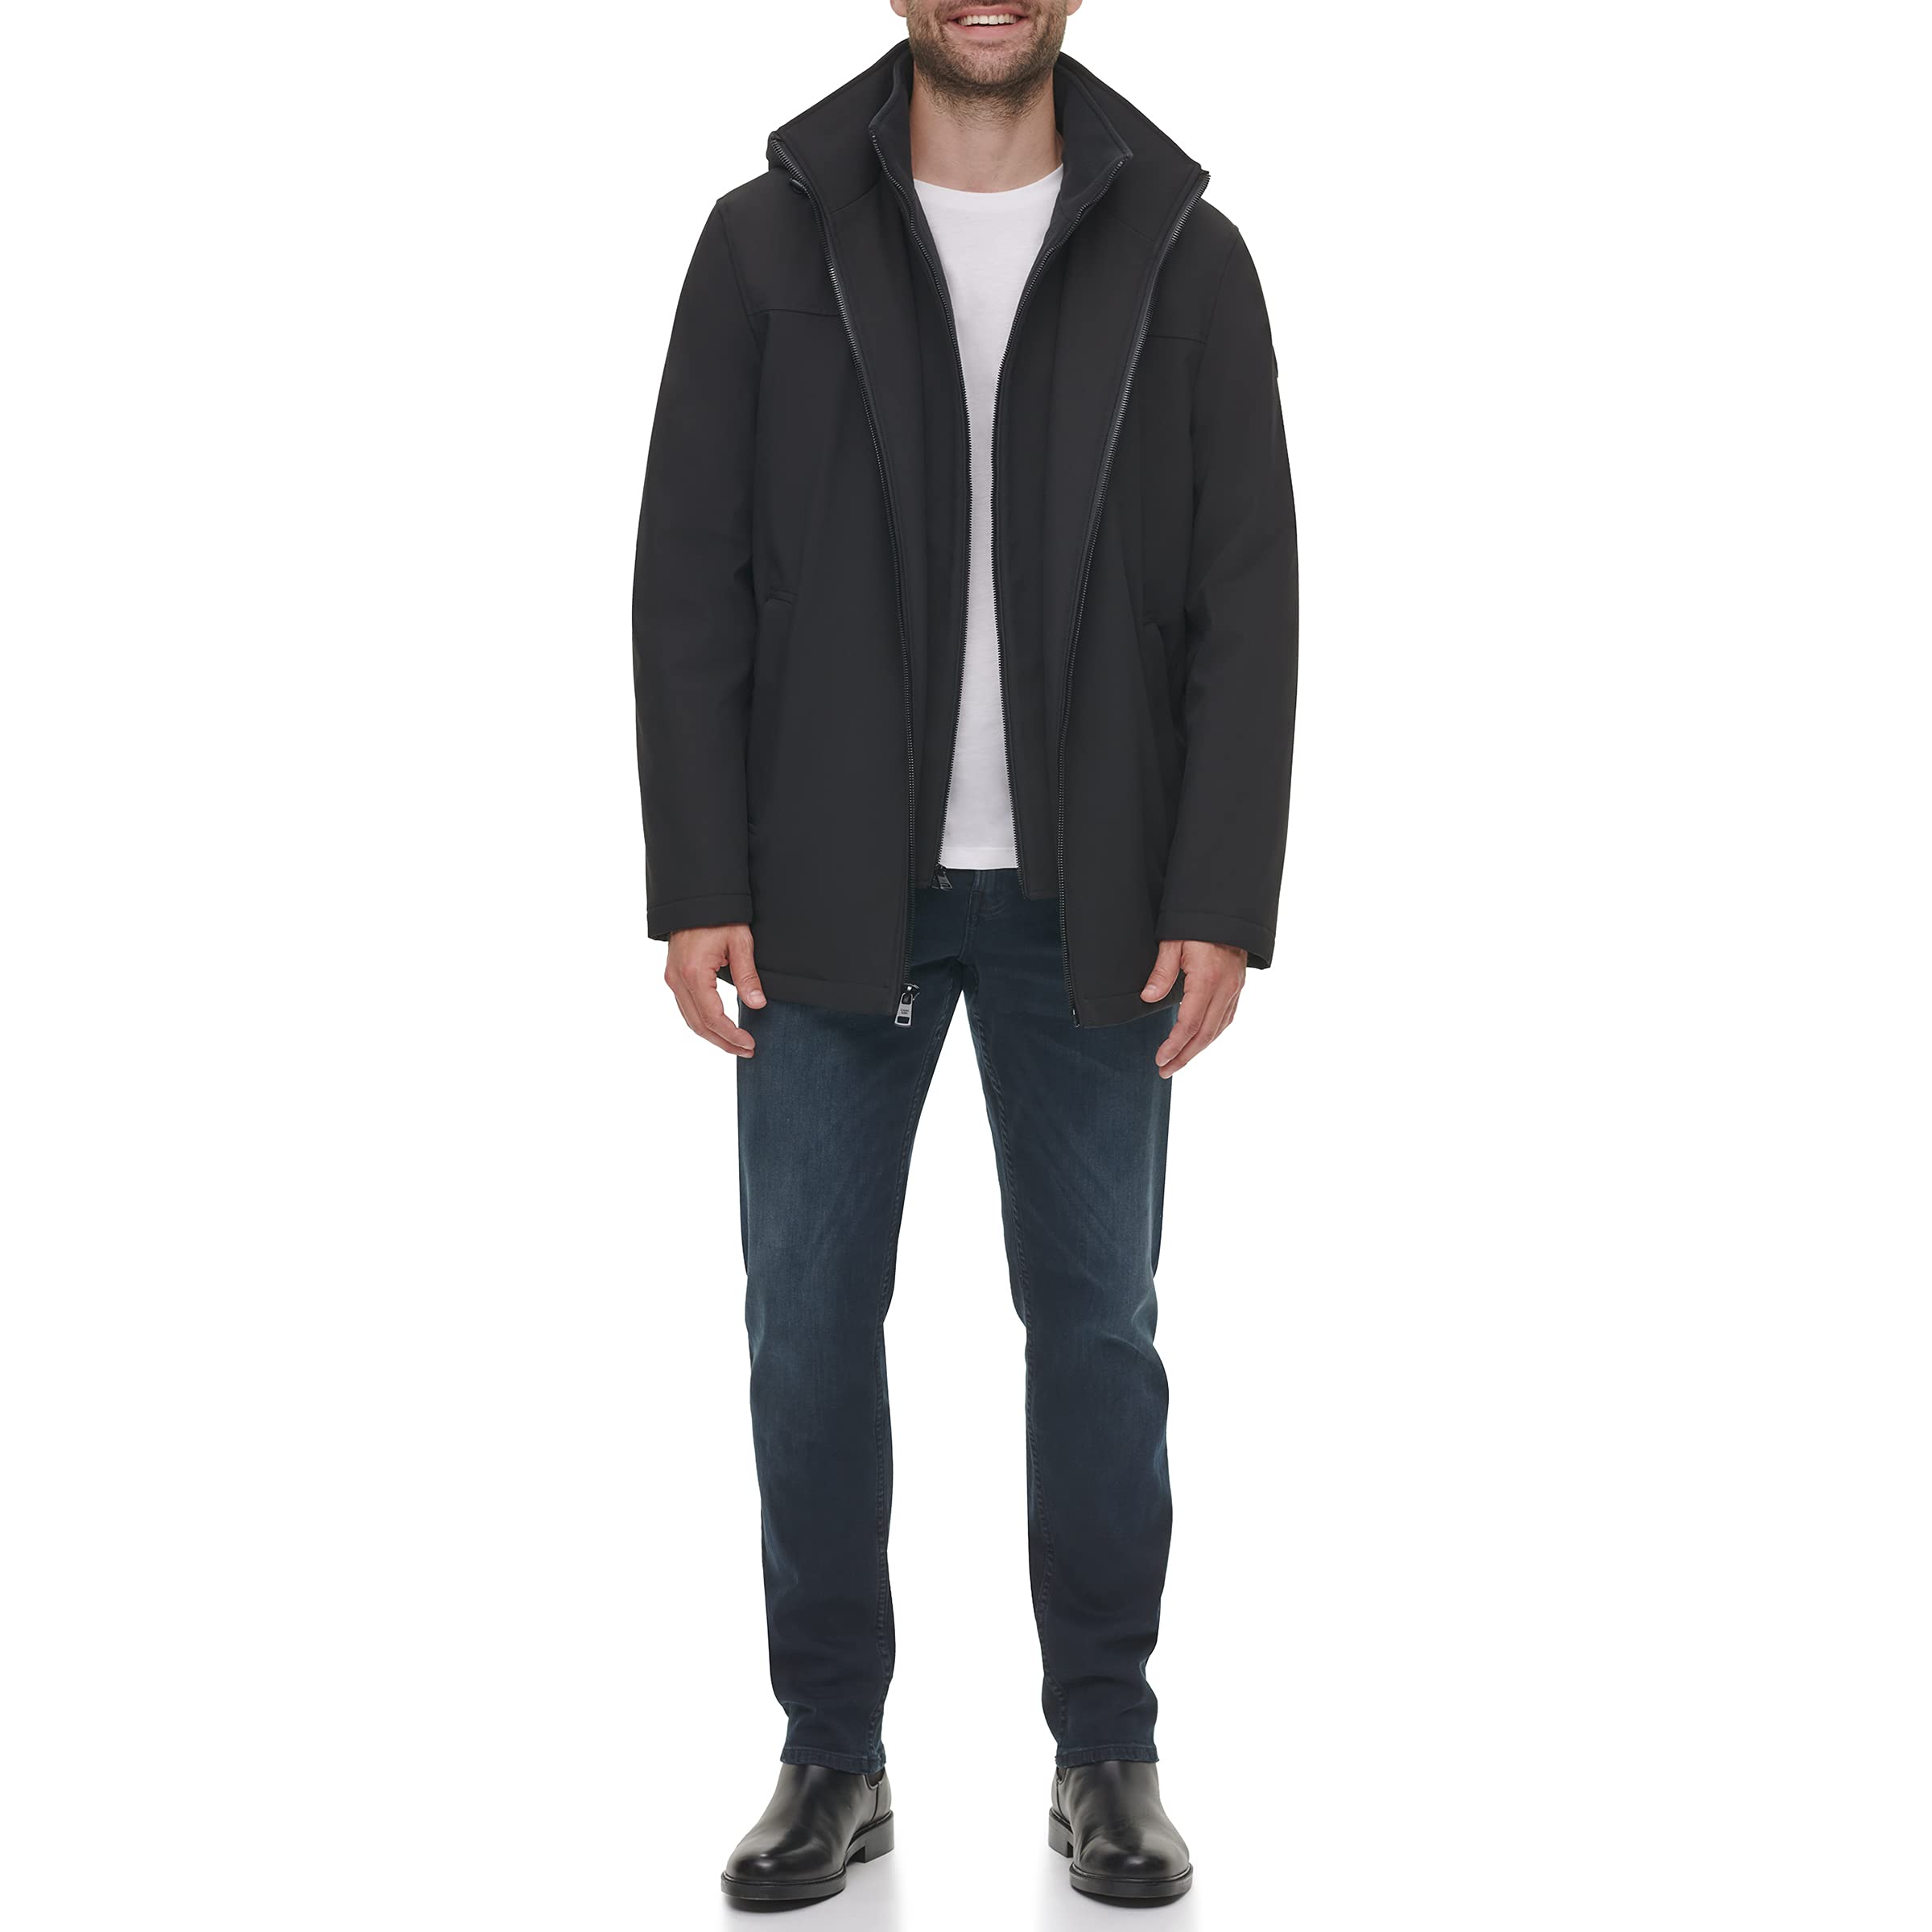 Calvin Klein Men’s Water and Wind Resistant Hooded Coat from Fall Into Winter